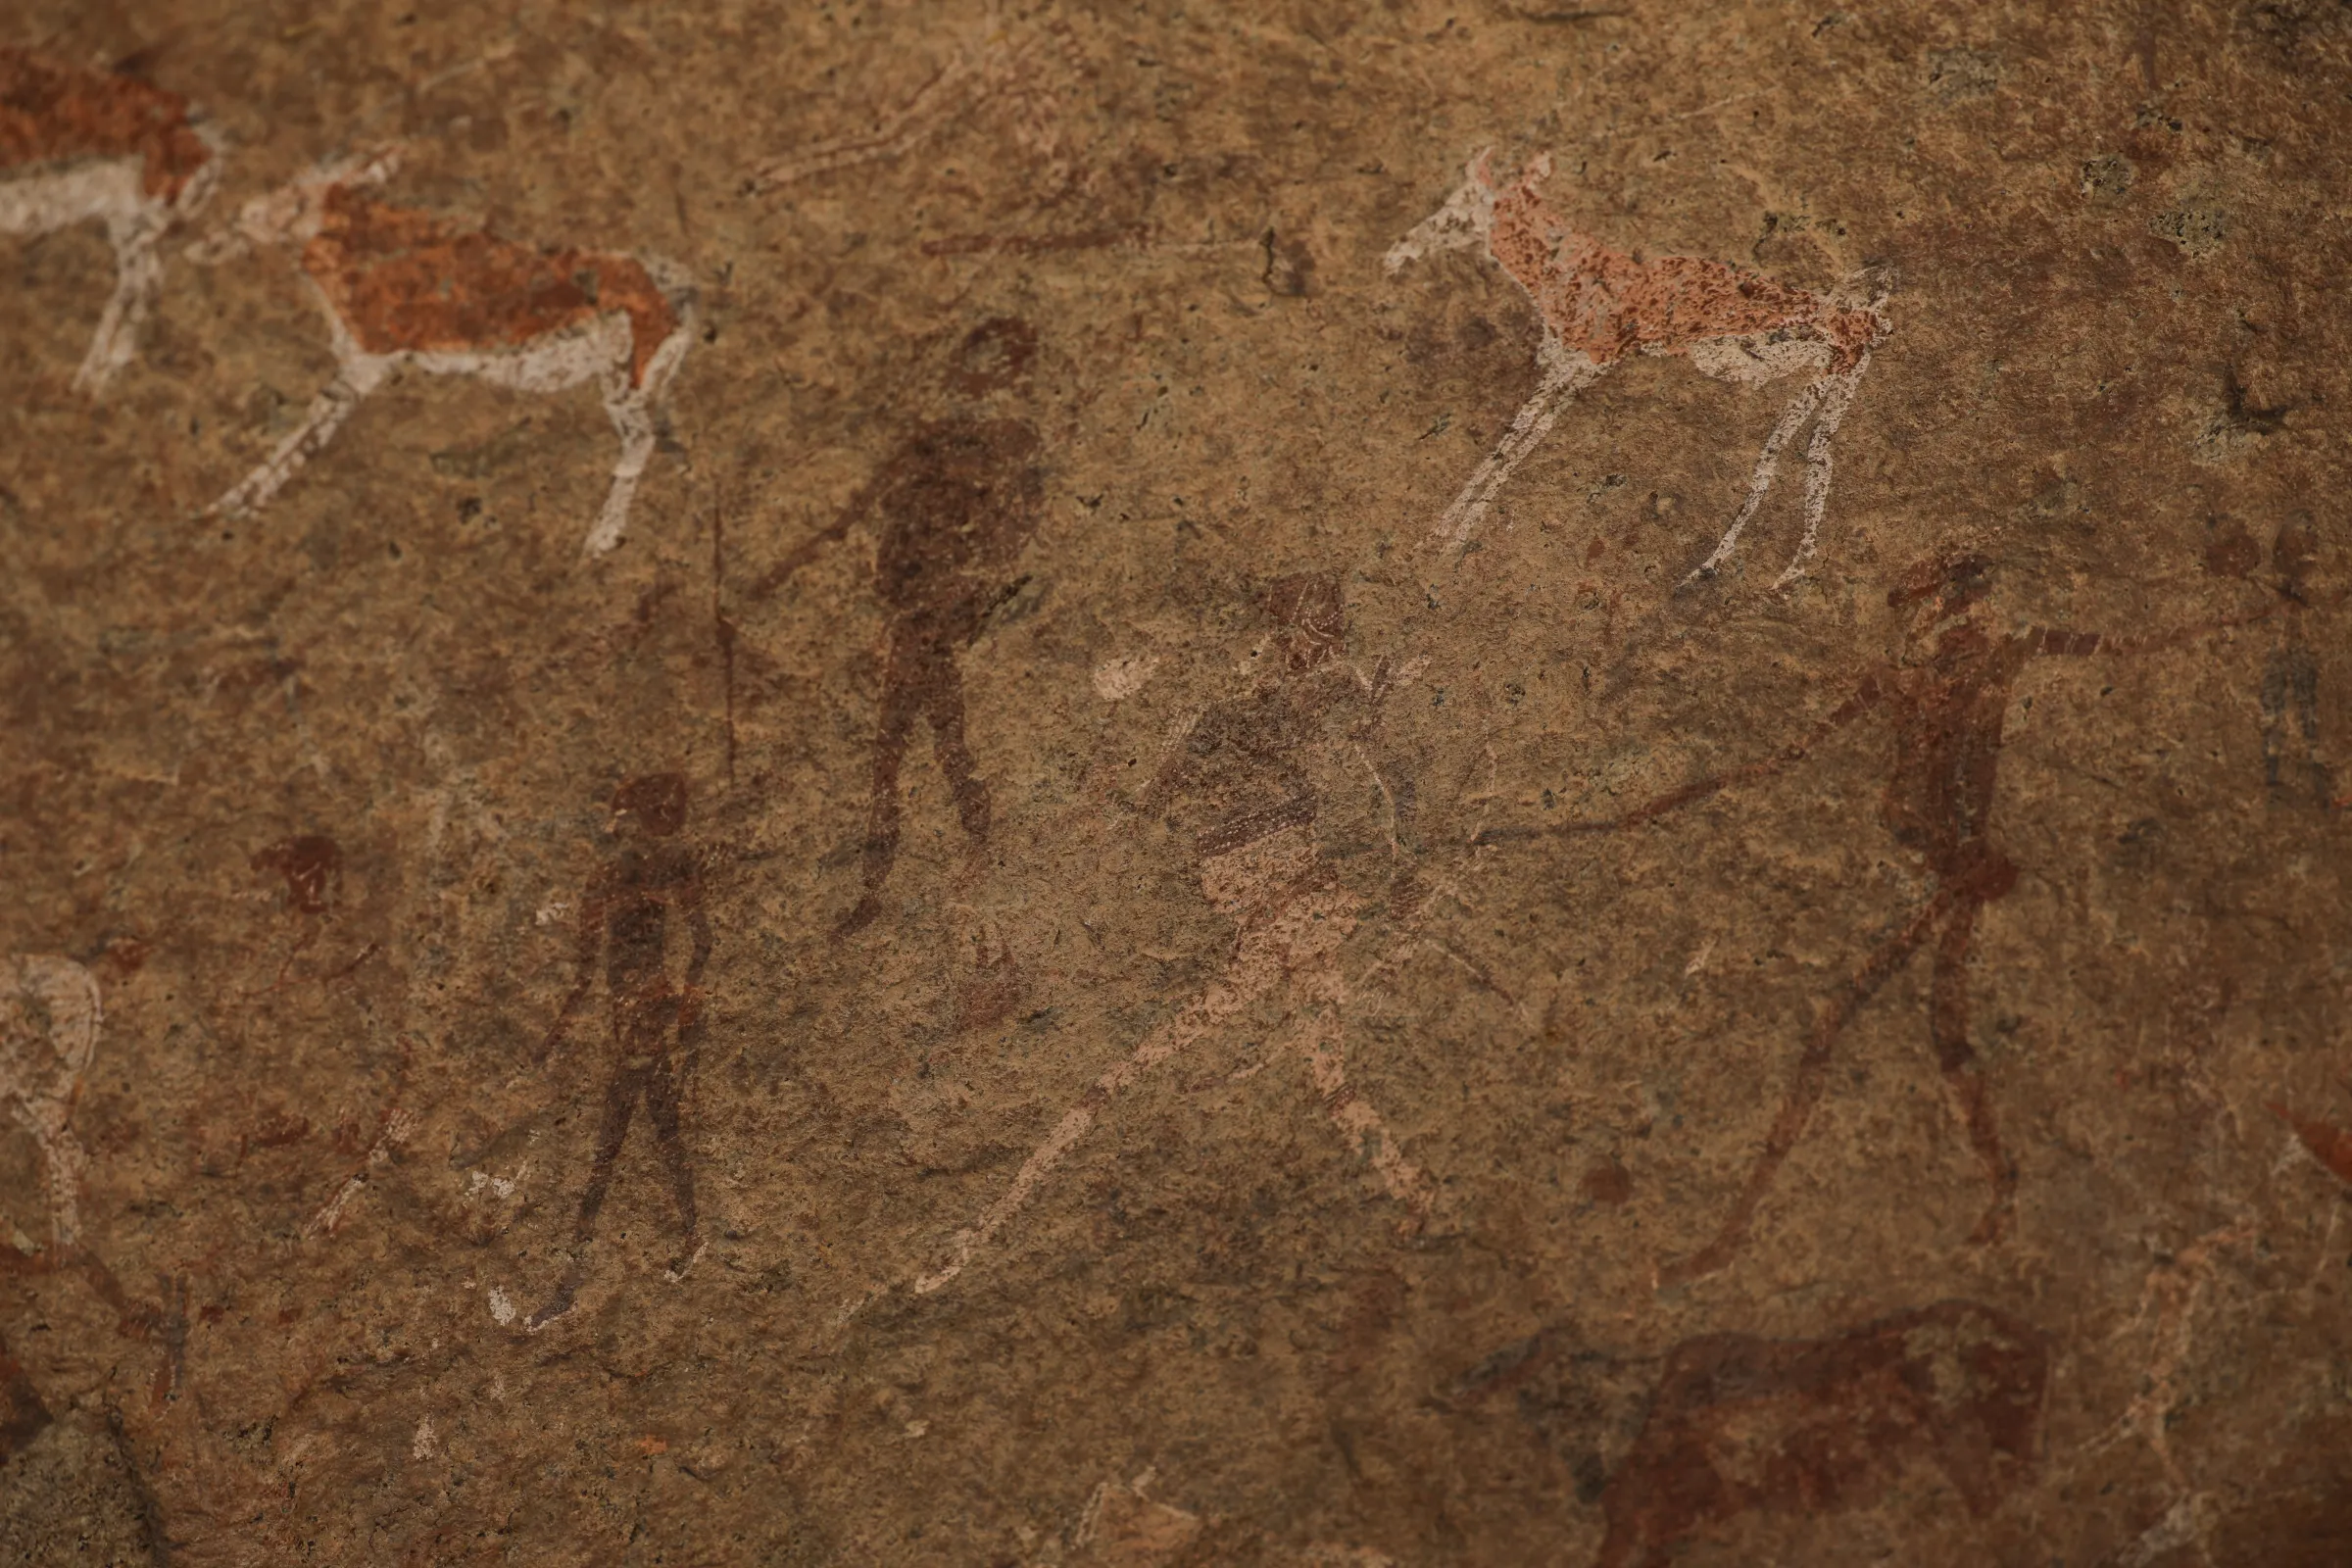 The famous “White Lady” rock art found in the Brandberg Mountain in western Namibia. Initially thought to be a female, the painting was later identified as a male shaman or spiritual leader, September 28, 2022